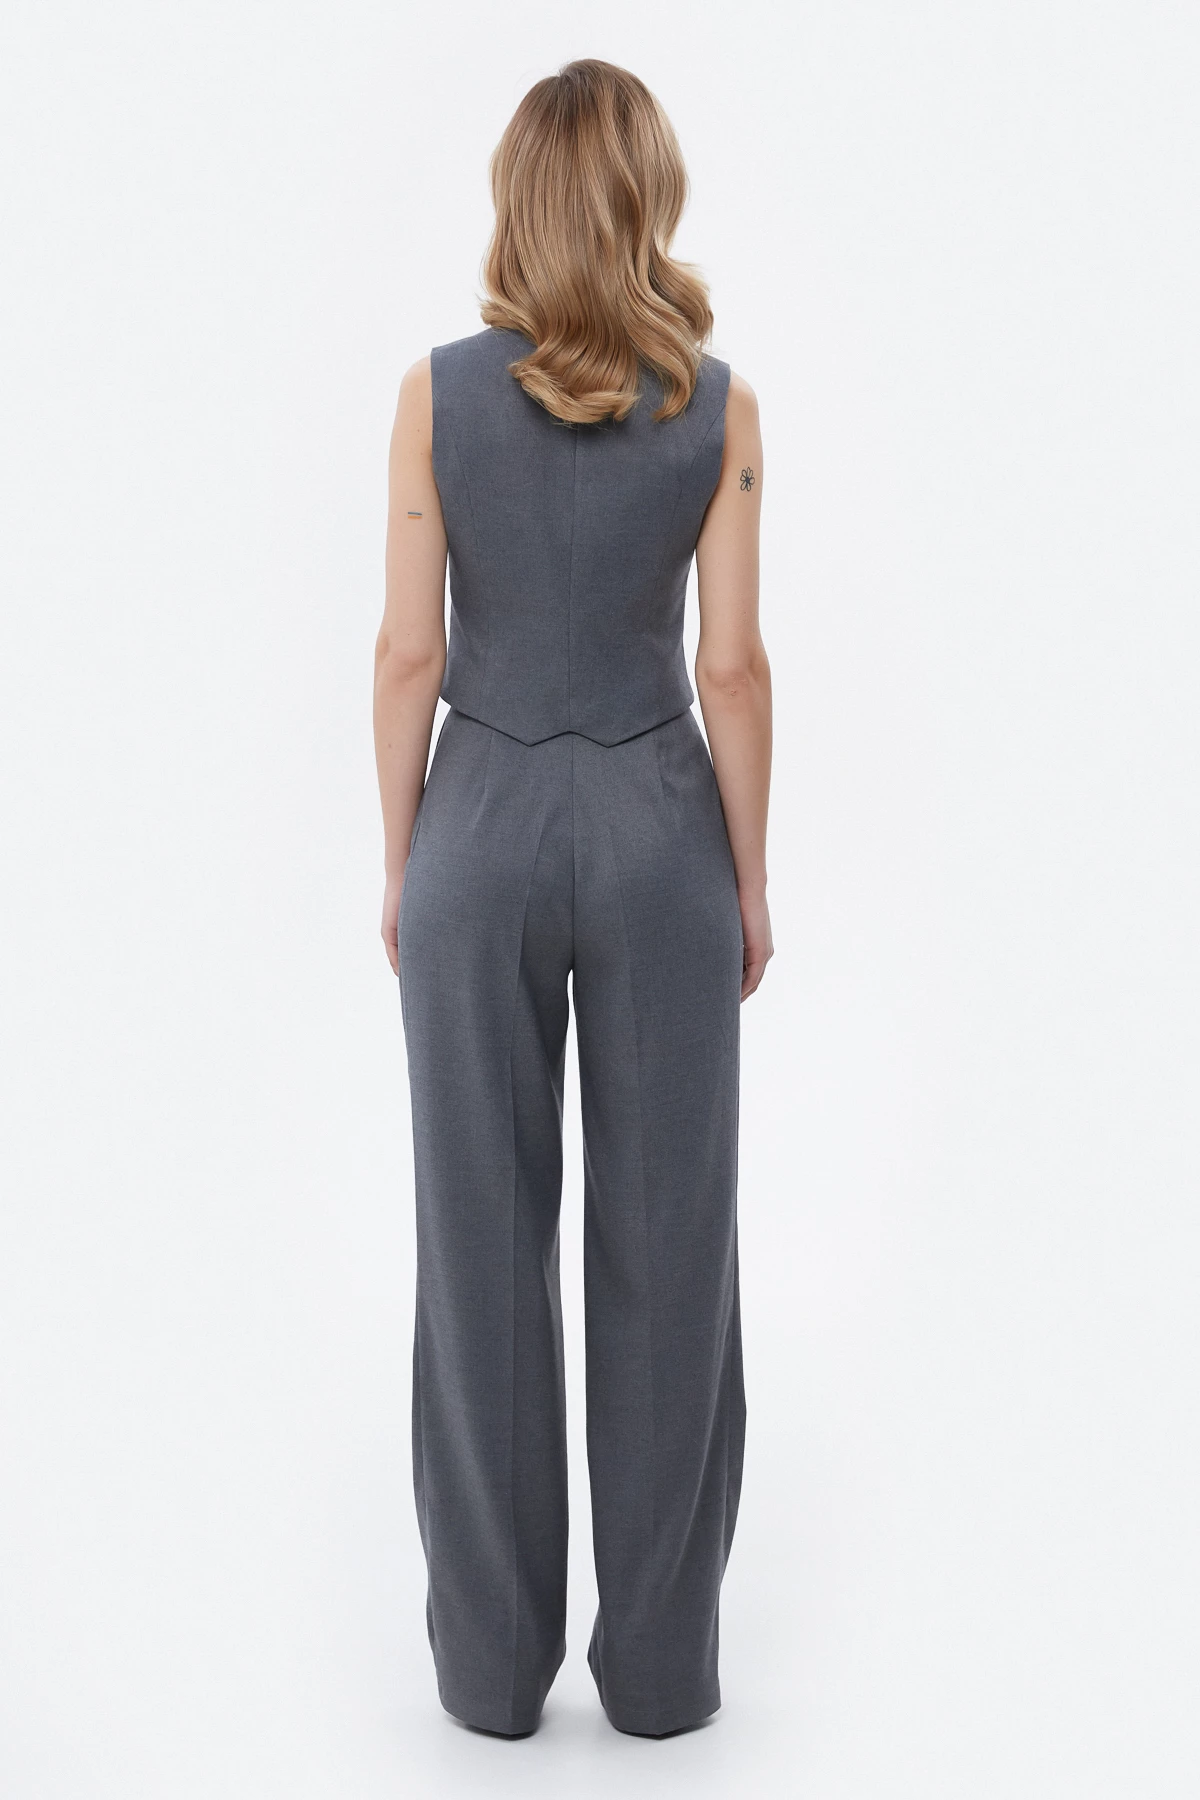 Wide elongated gray pants with viscose, photo 4